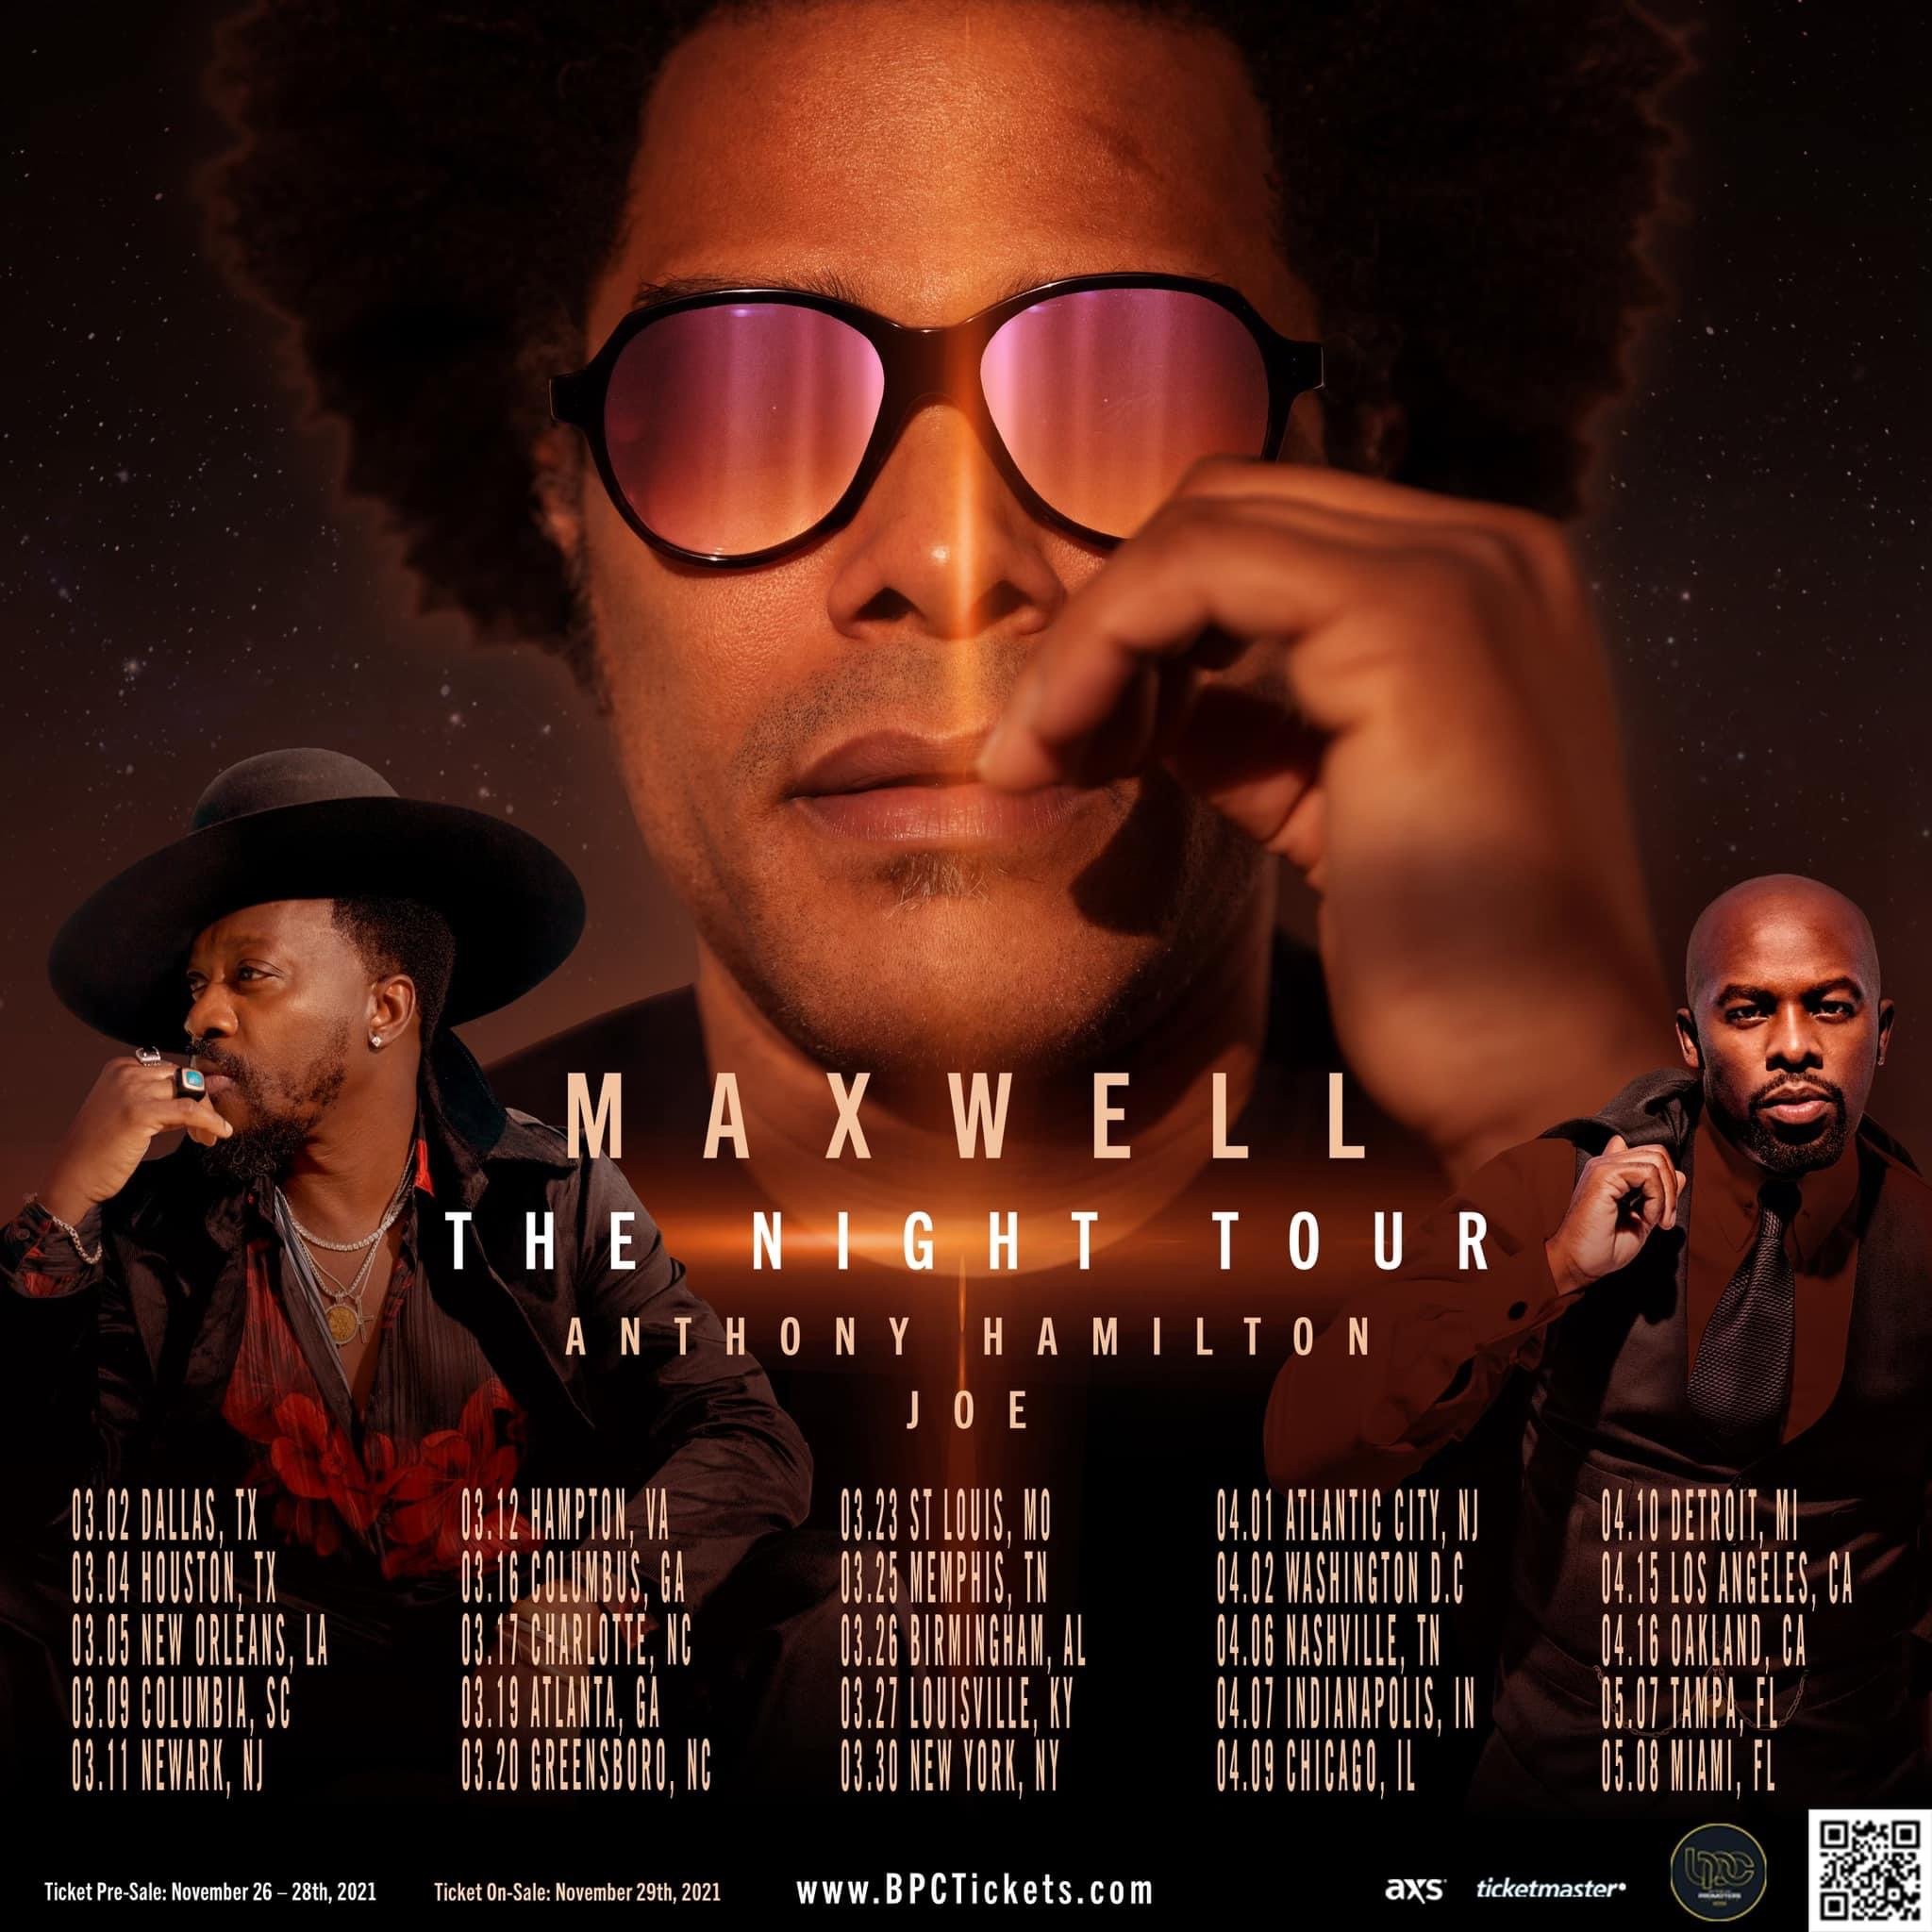 The Night Tour, Starring Maxwell, with Performances by Anthony Hamilton